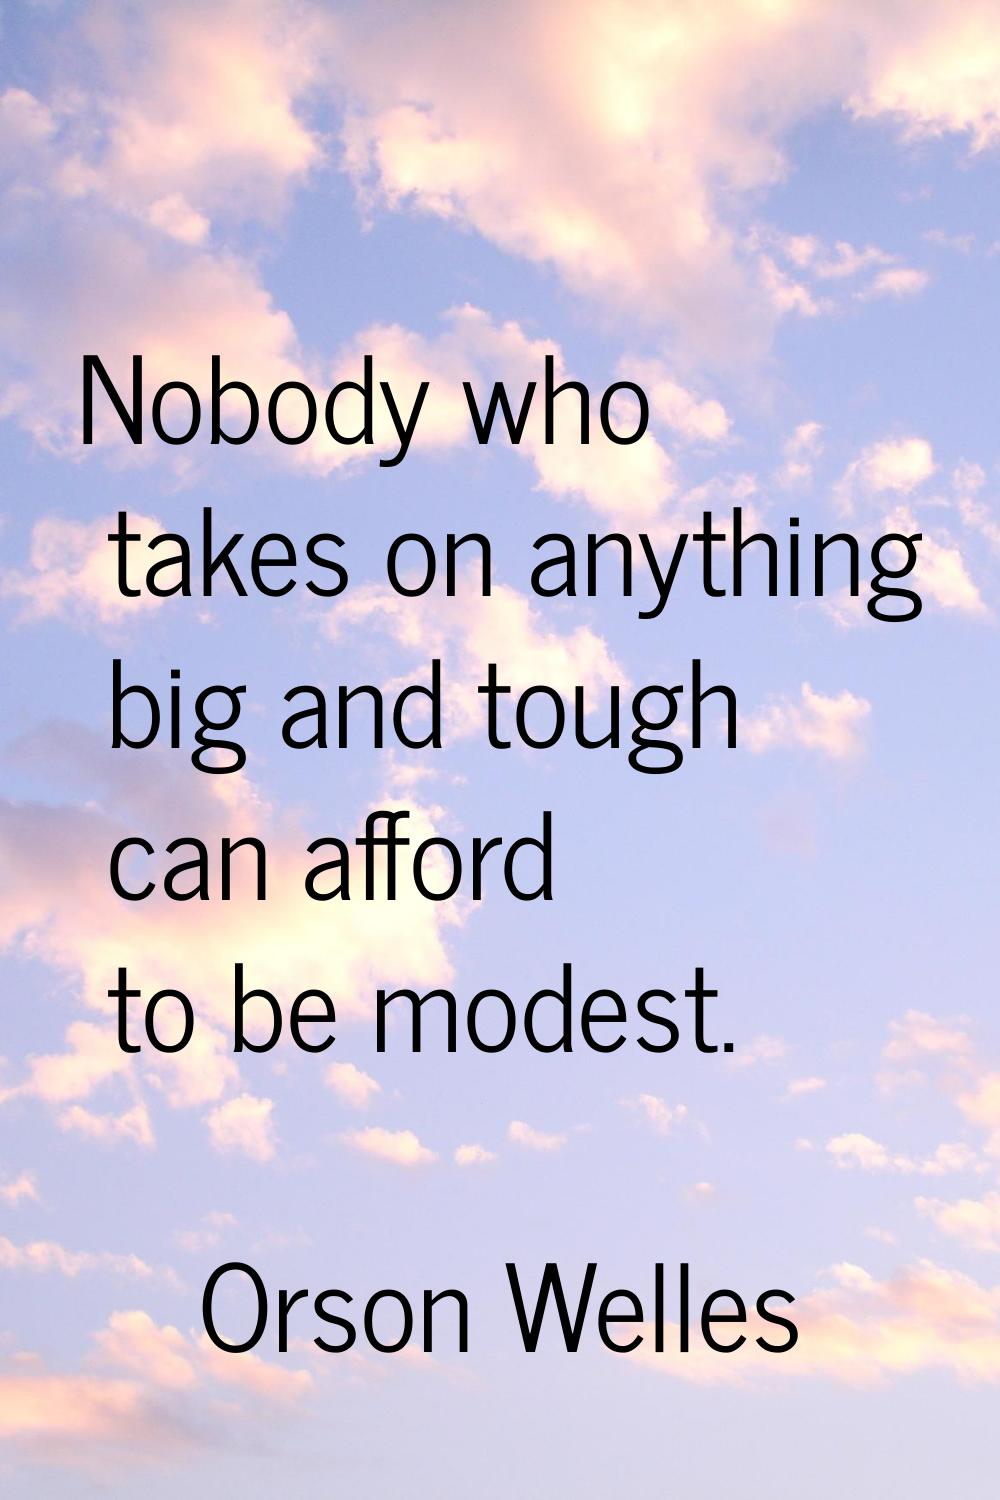 Nobody who takes on anything big and tough can afford to be modest.